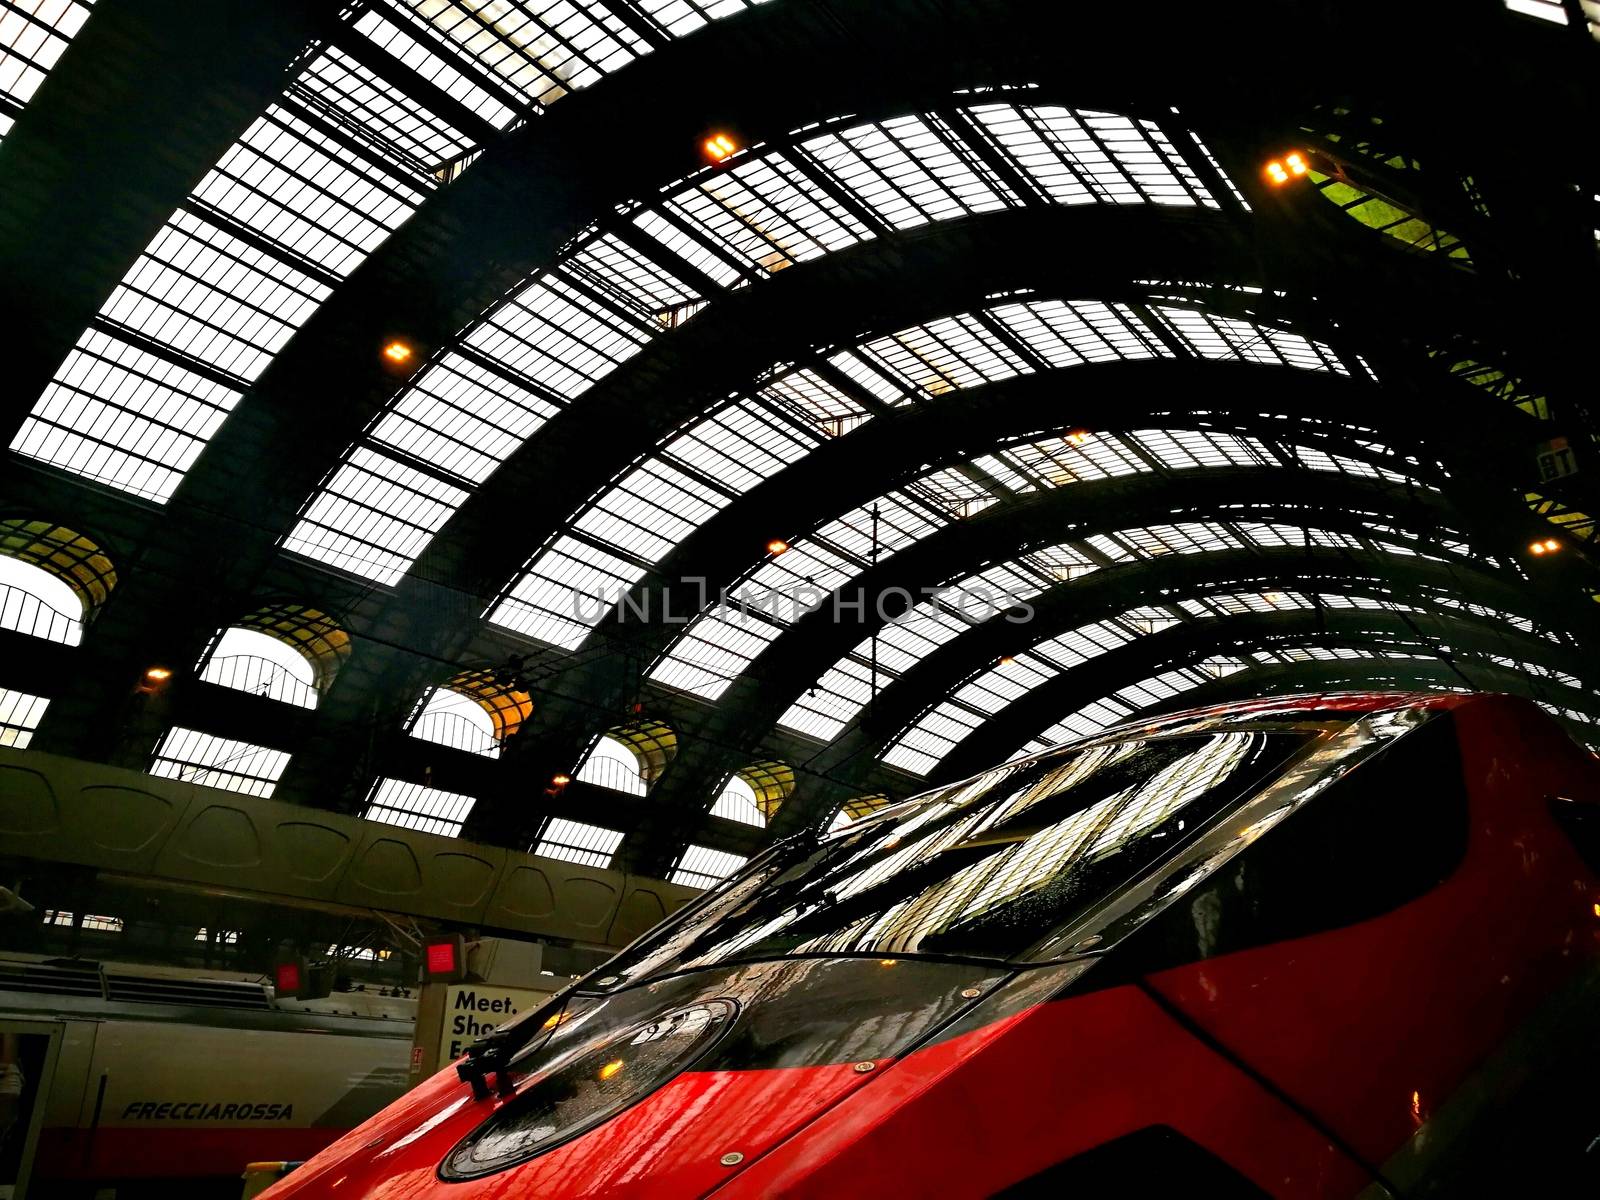 Architectural detail in Milan Central Station in Milan, Italy. Low angle view with dark shades and natural light from top. Red high velocity train close-up